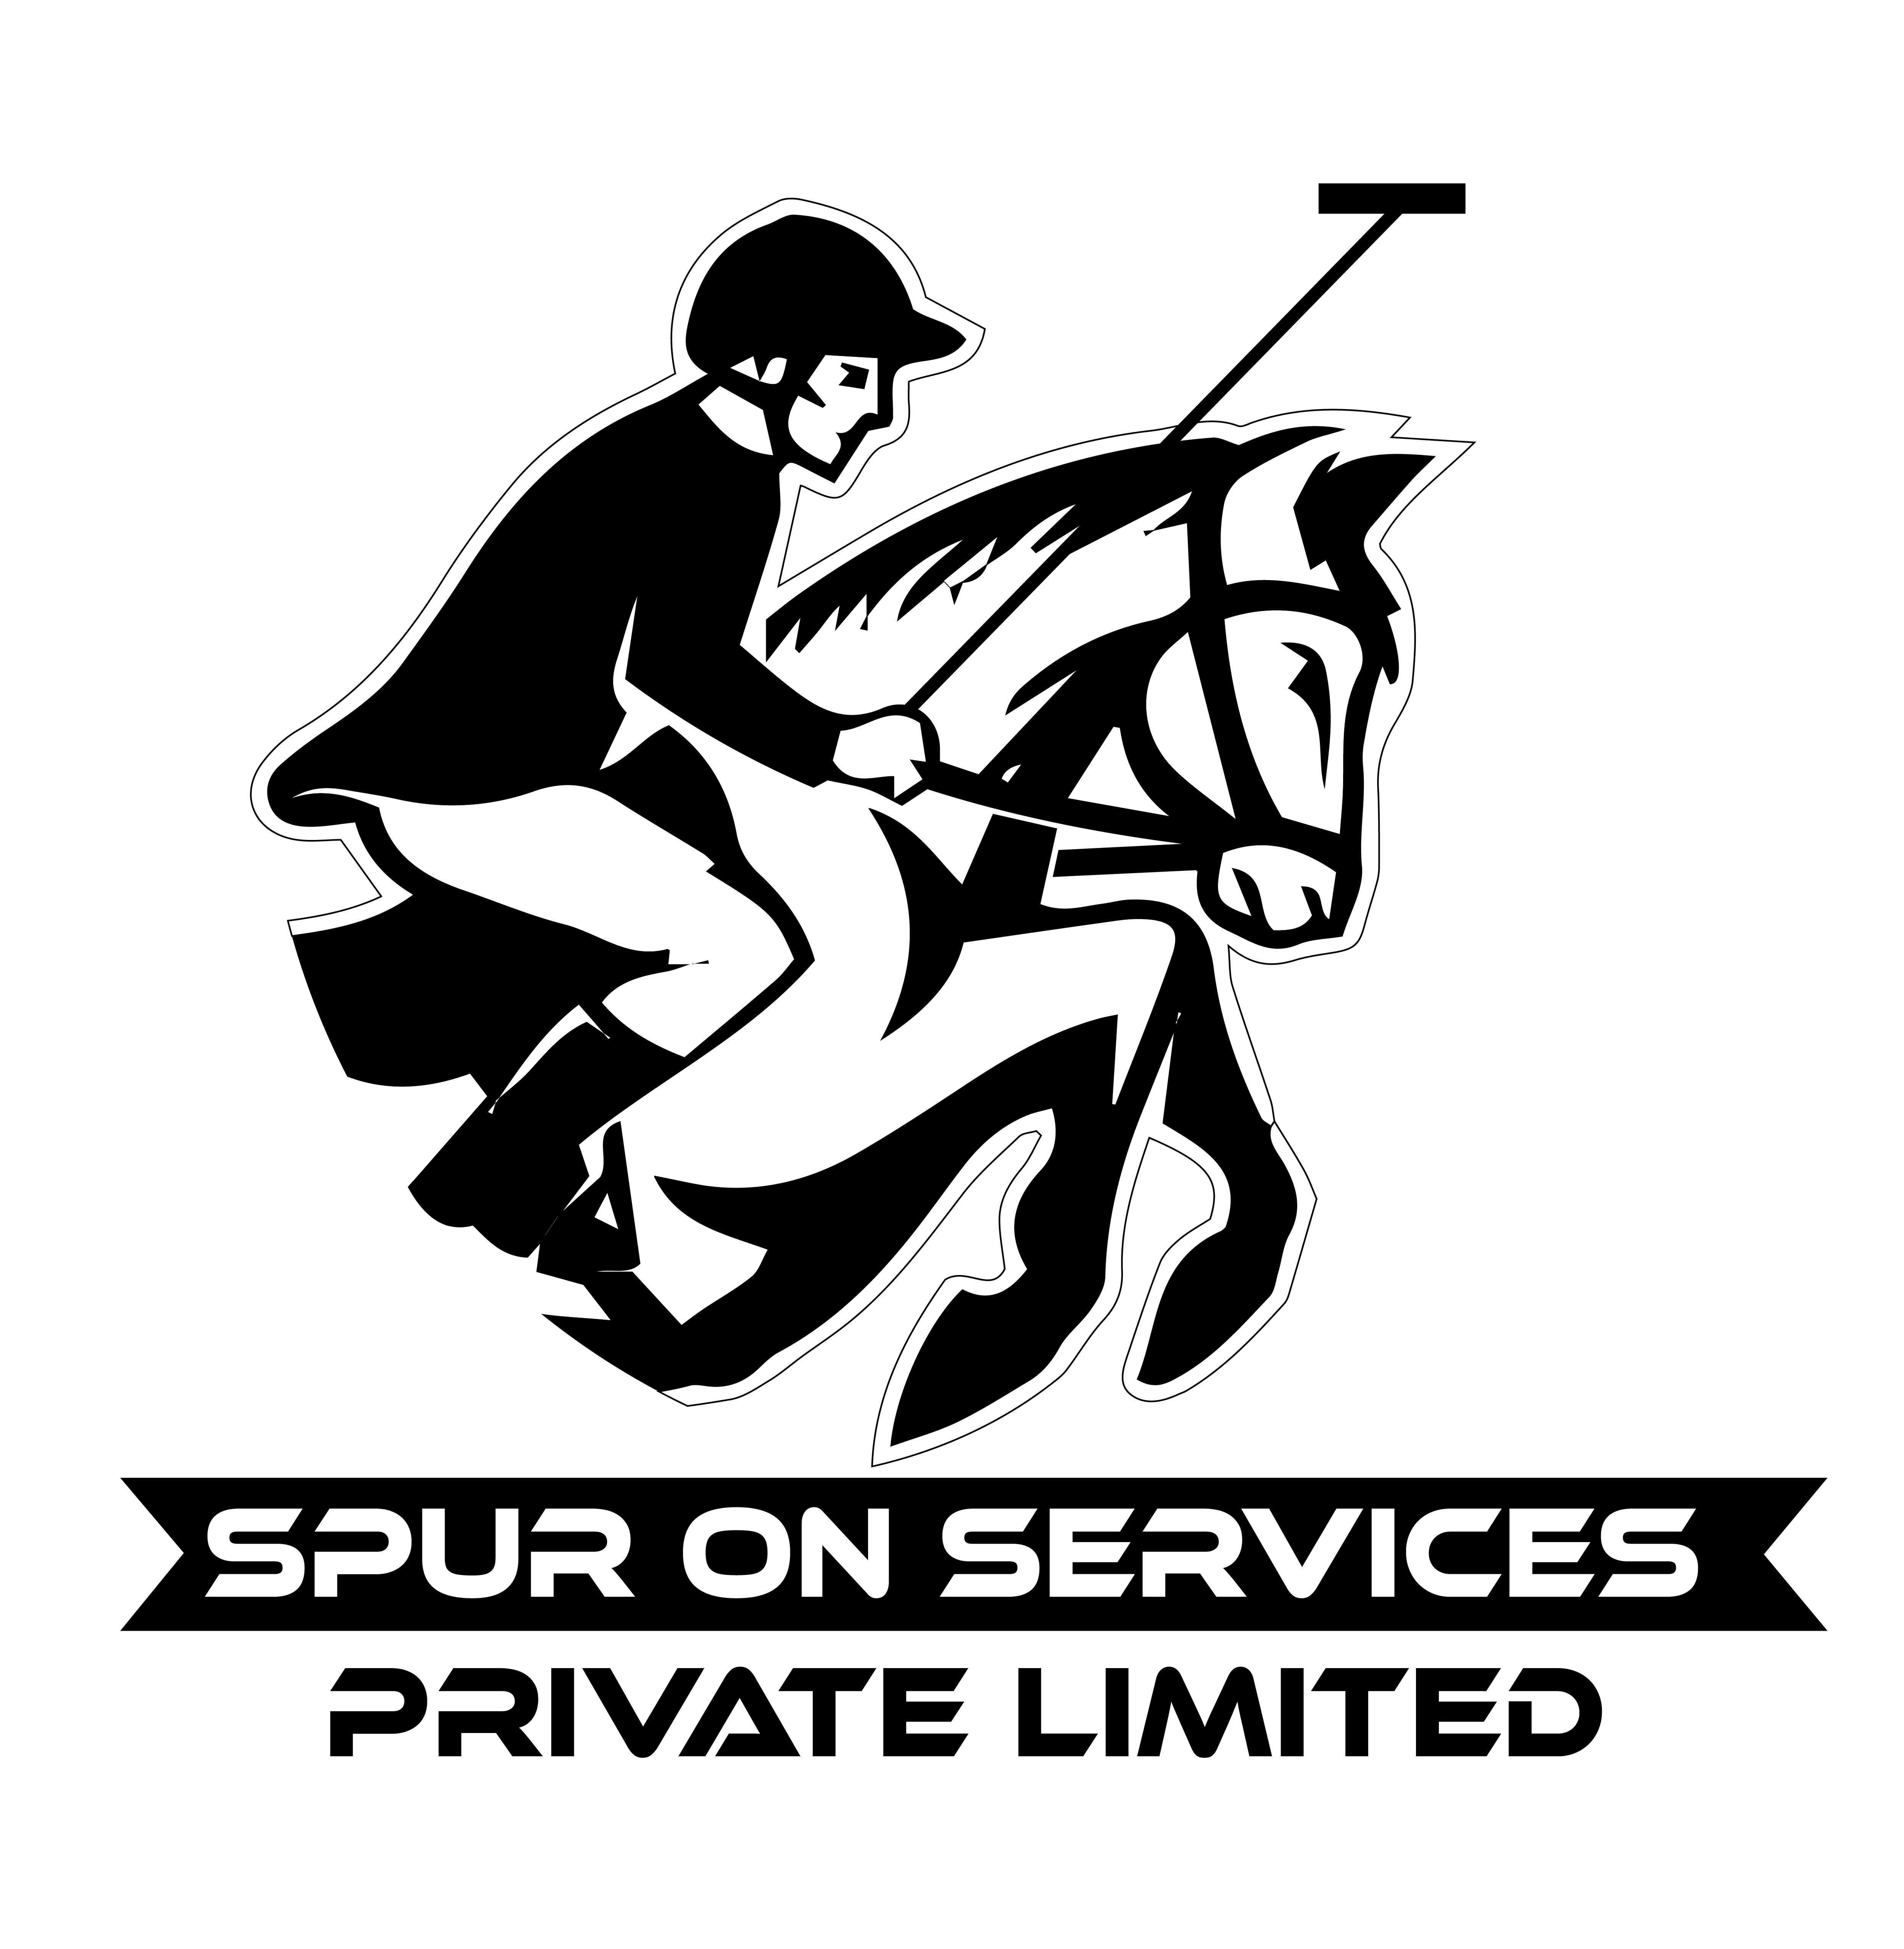 Spur on Services